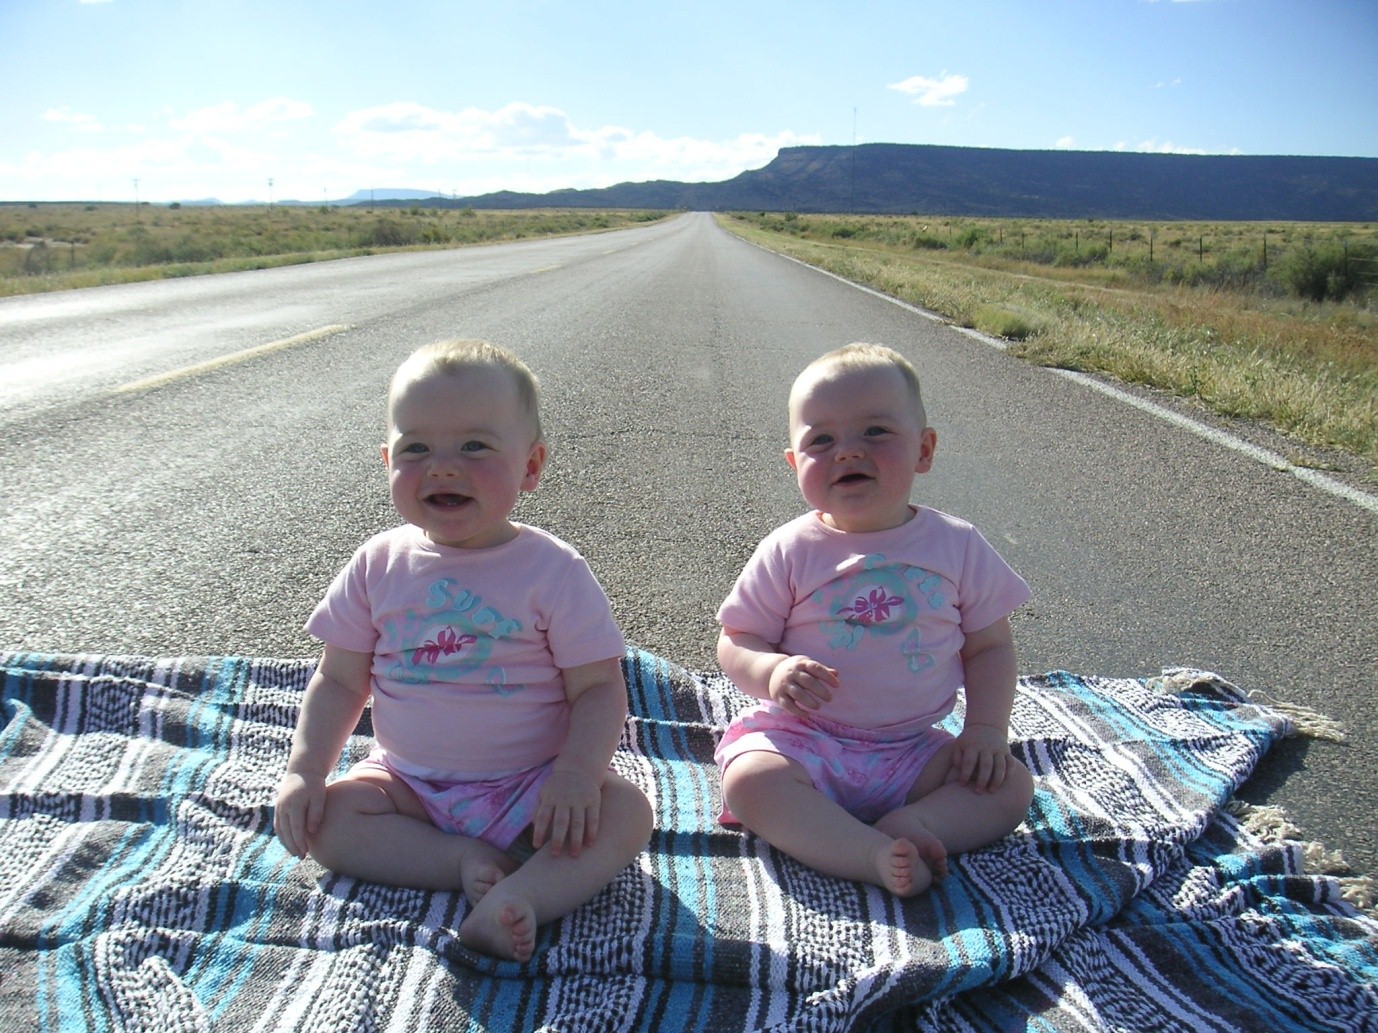 Babies on Tour, Route 66, Travel with Babies, Family Friendly, Open Road